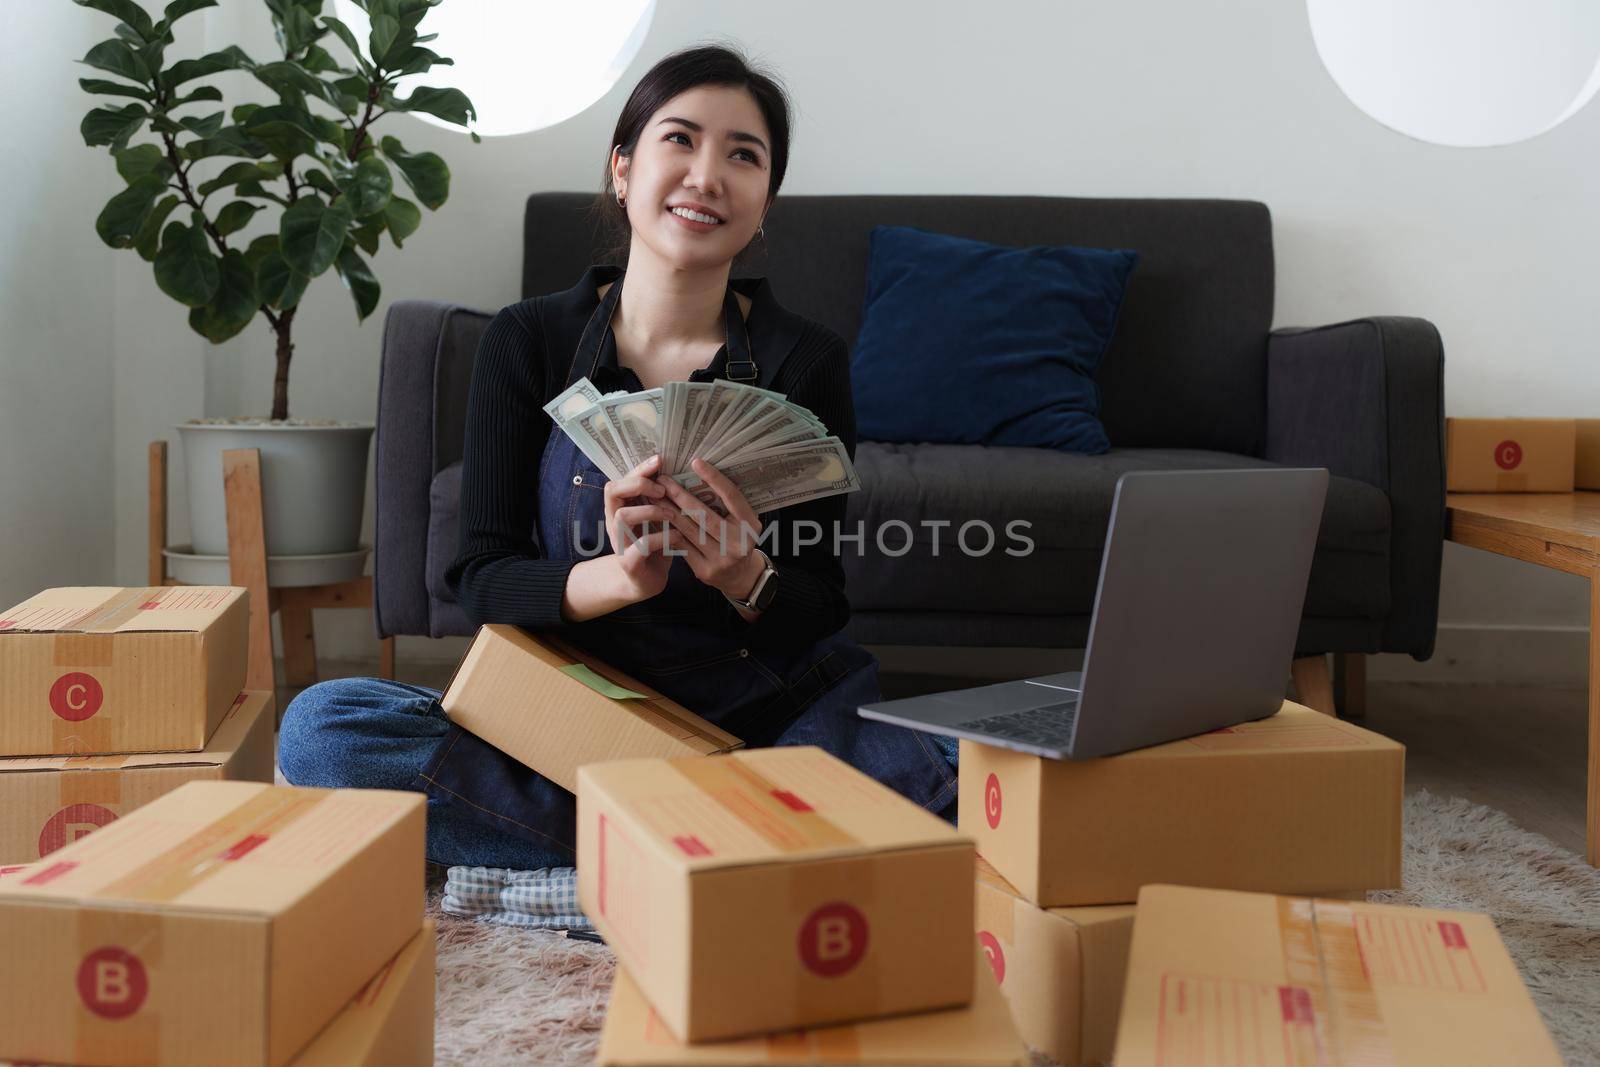 Asian SME business woman holding money and happy. online shopping concept.